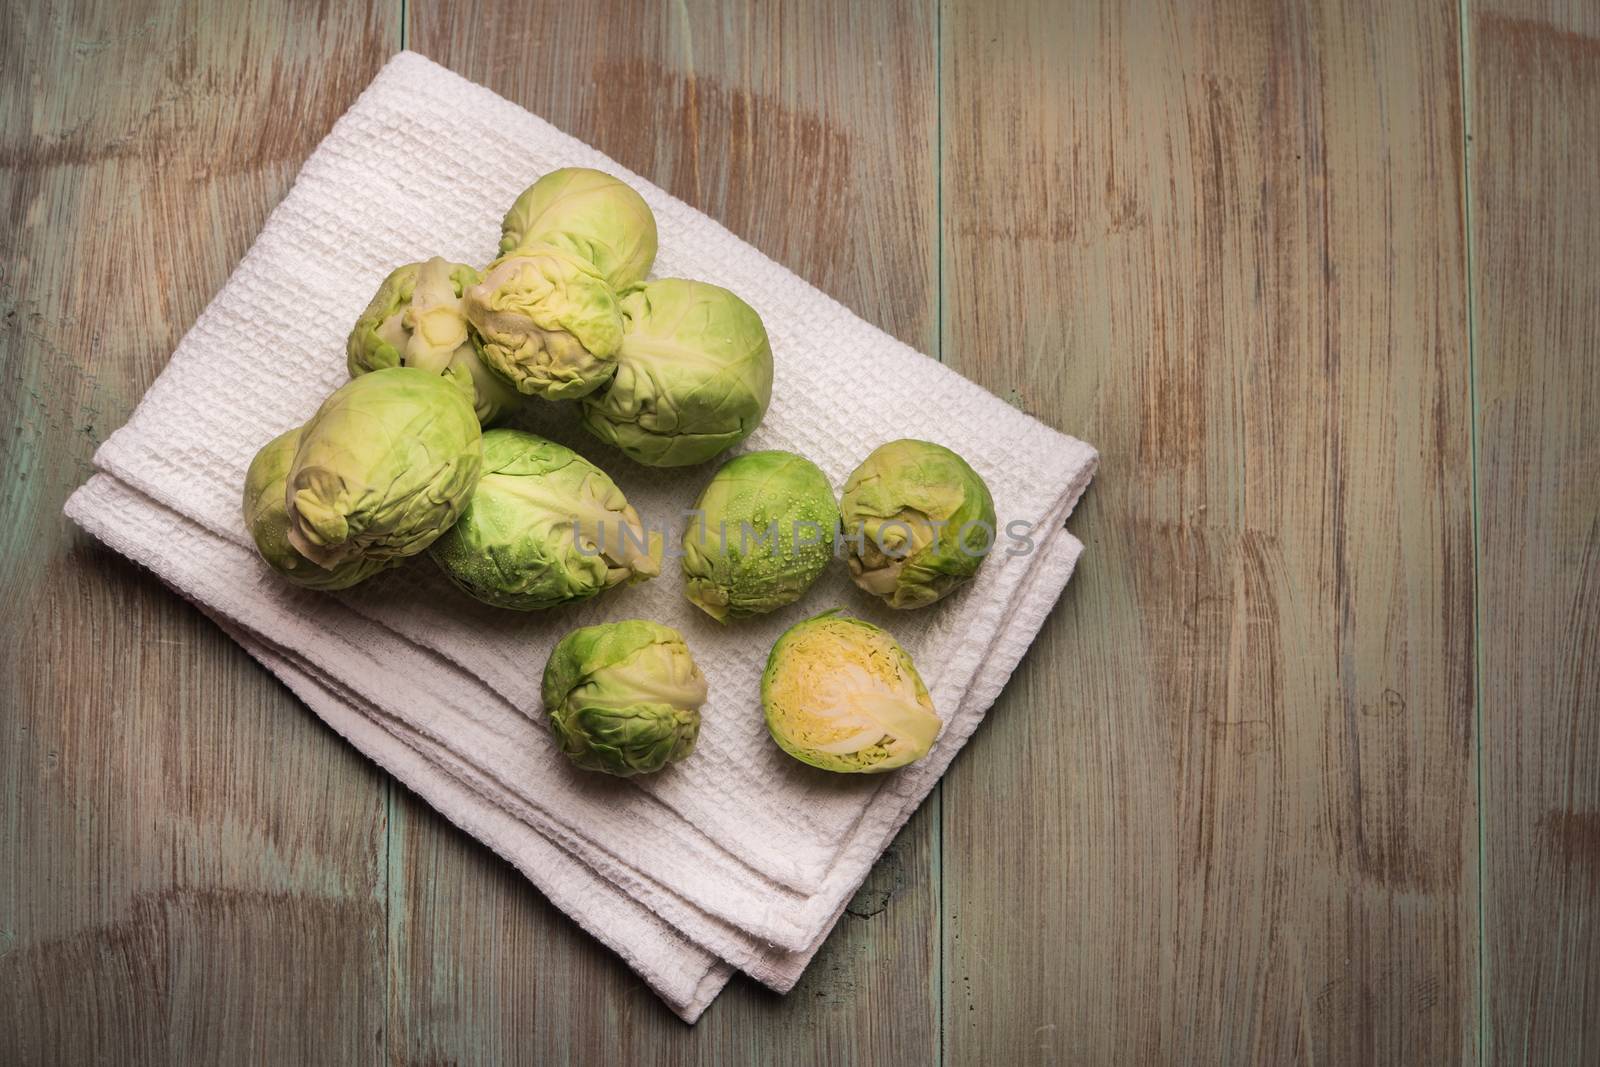 Fresh brussel sprouts over rustic wooden texture. Top view with copy space.